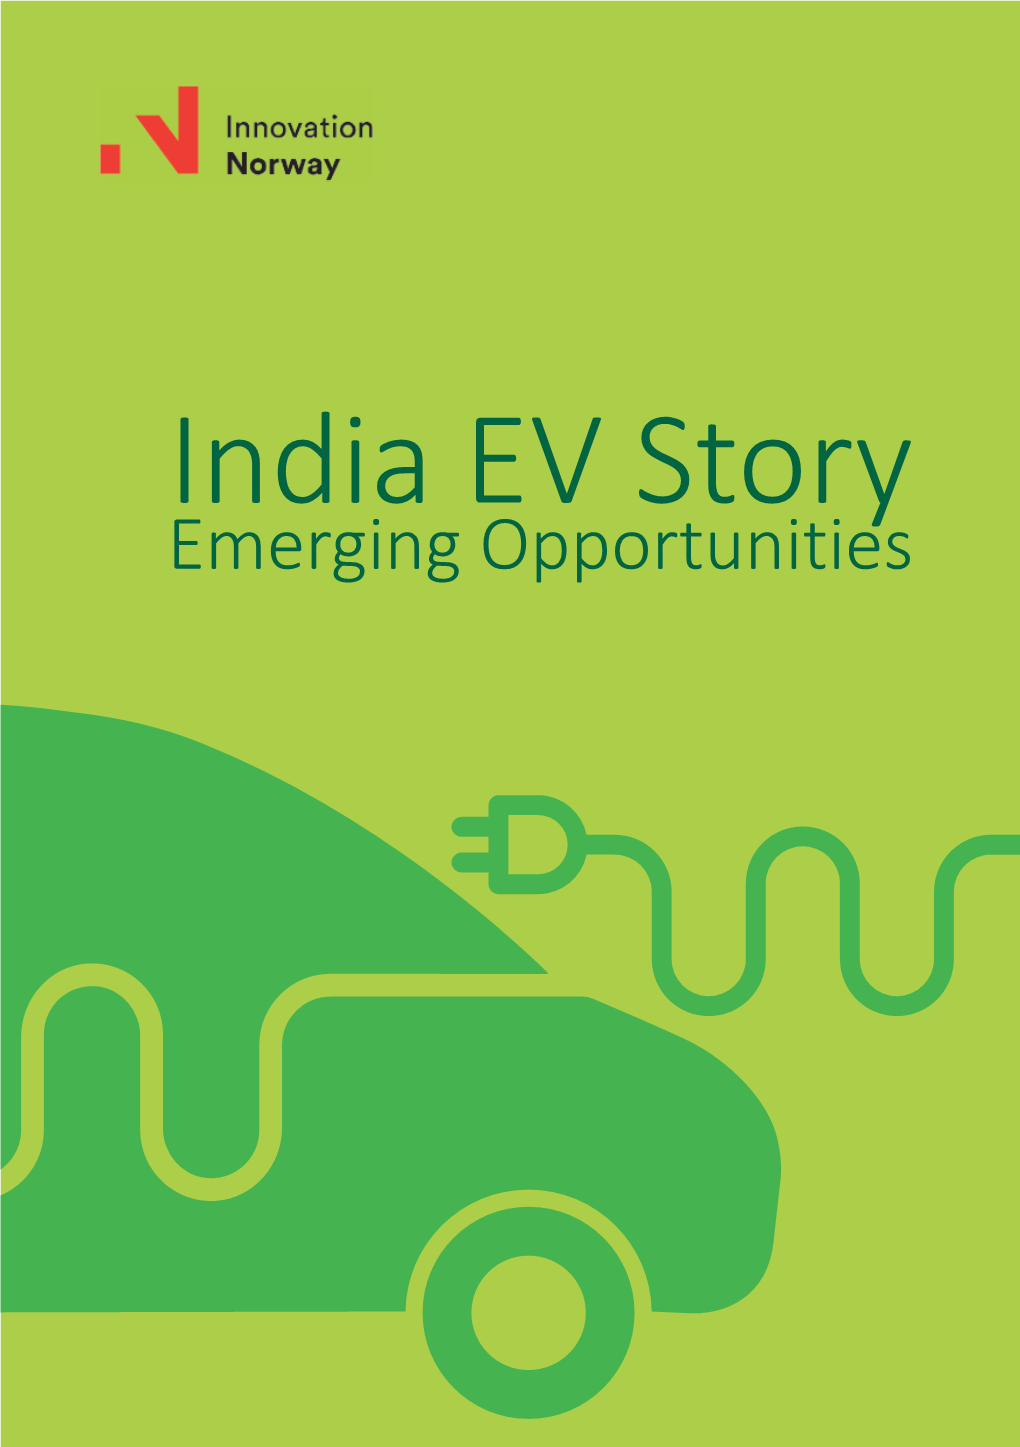 India EV Story Emerging Opportunities